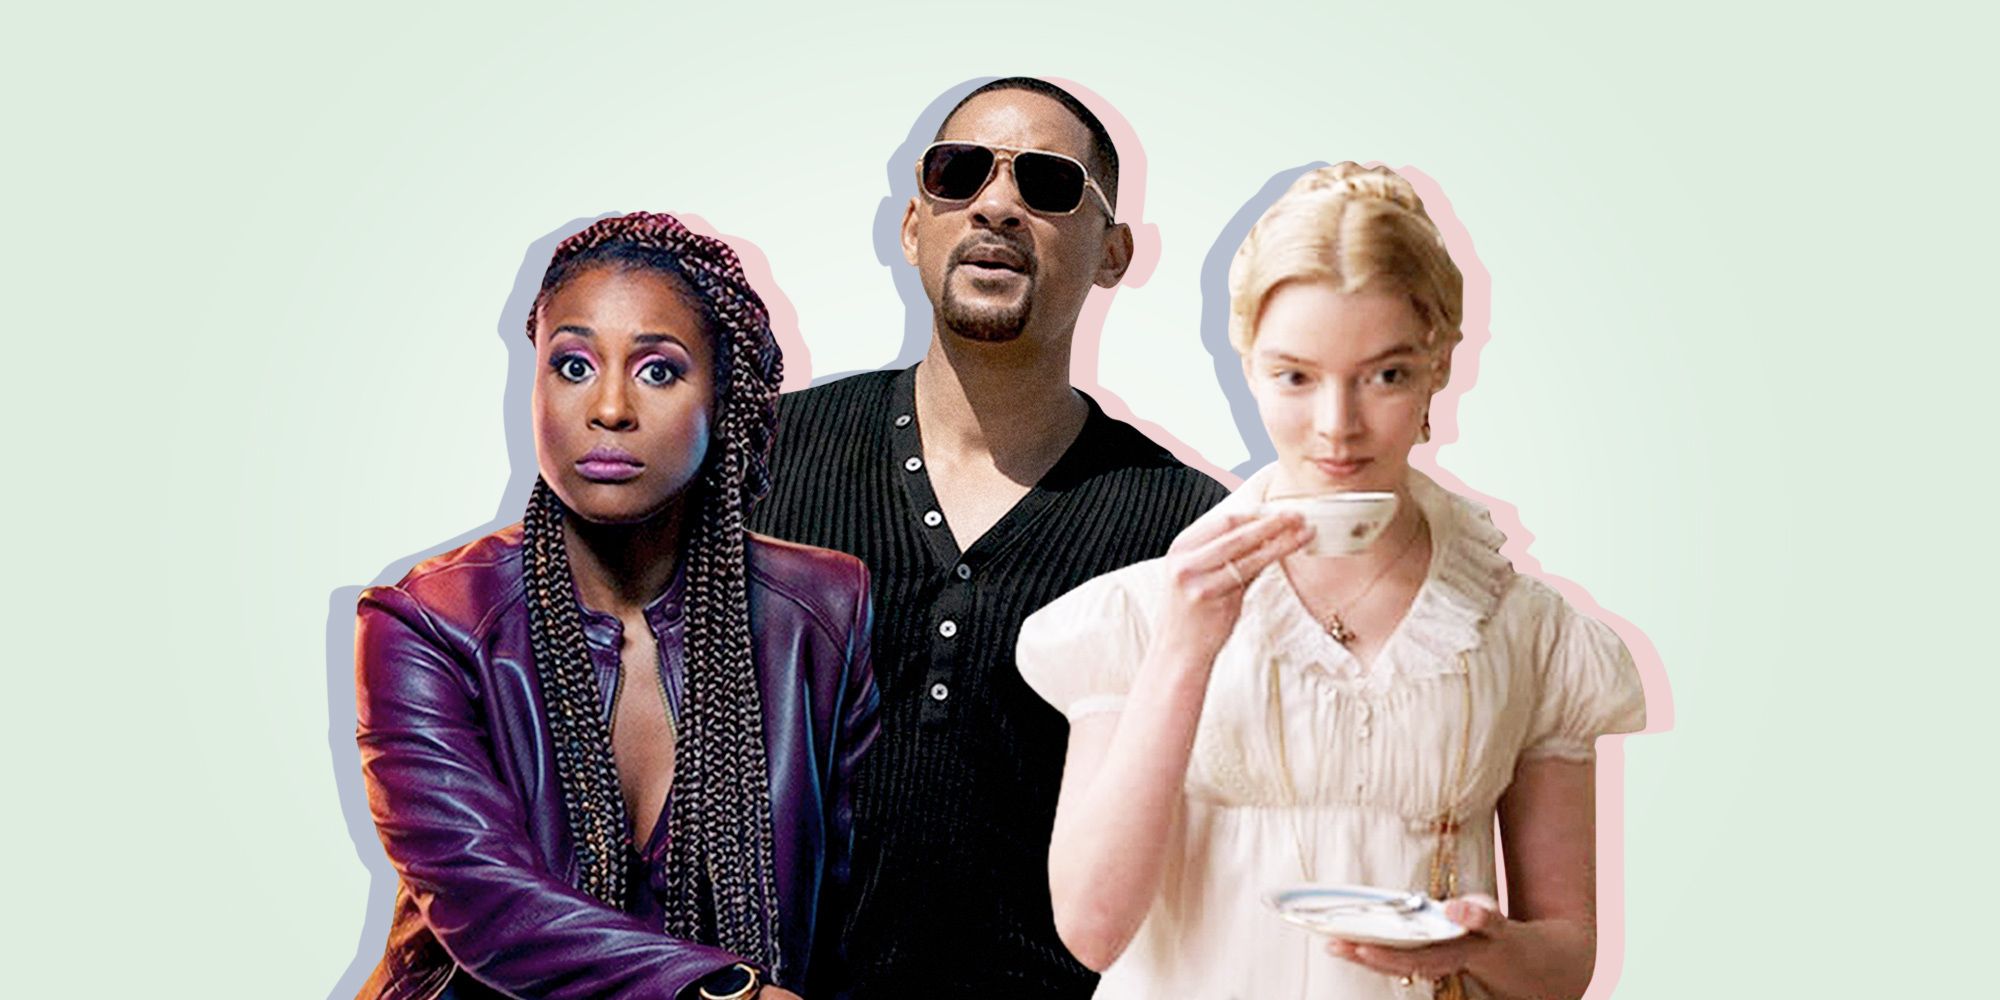 Comedies To Watch 2020 : The Best Comedies Of 2020 Funniest New Movies To Watch / And other movies + tv shows online.